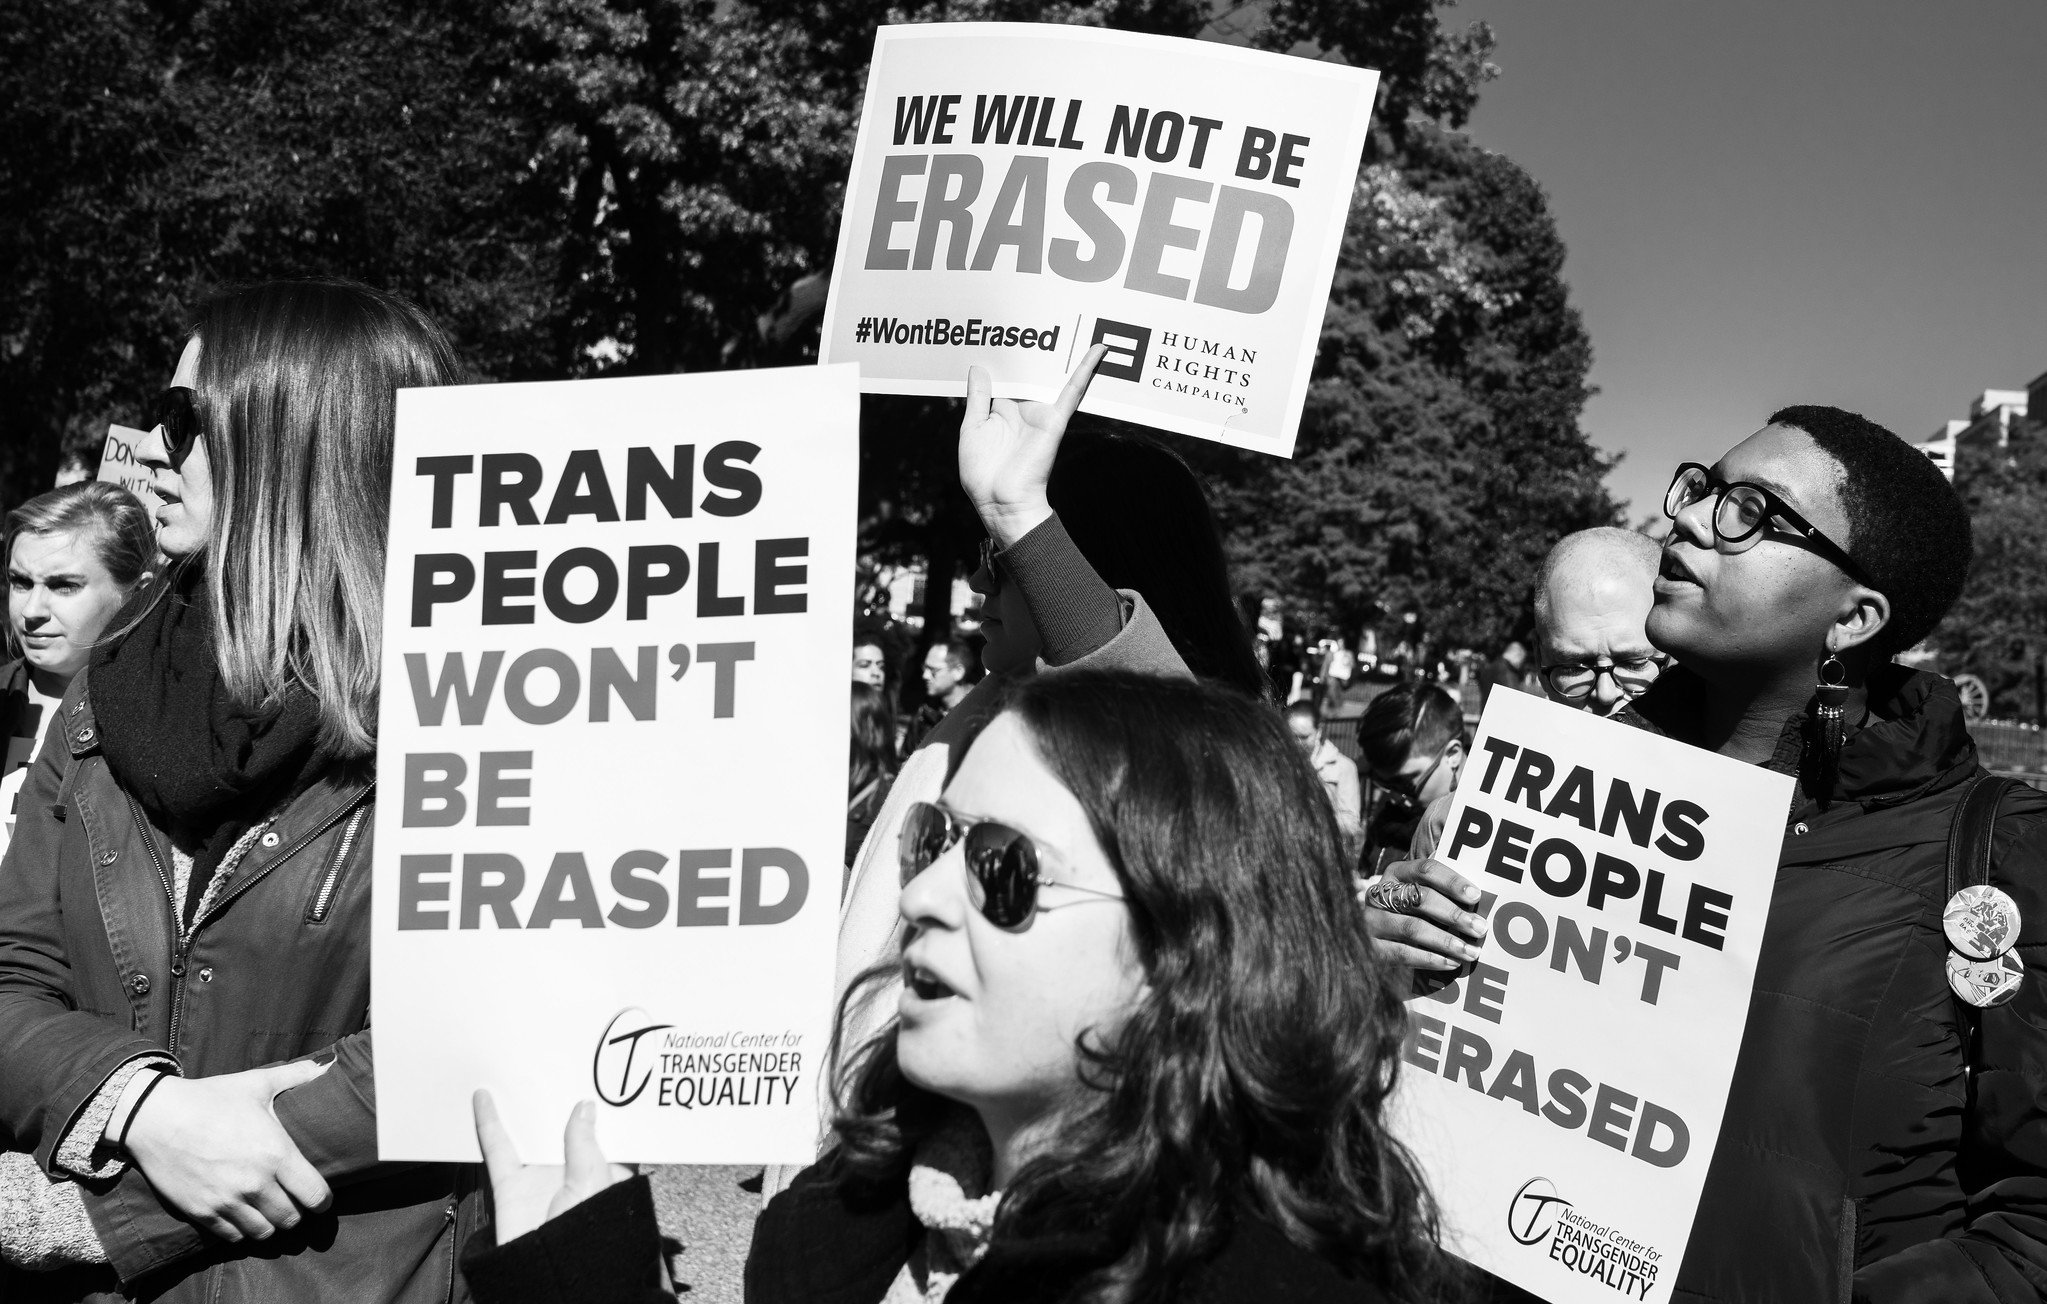 In a black and white photo, protesters hold signs demanding transgender rights, including "Trans People Won't Be Erased" and "We Will Not Be Erased".